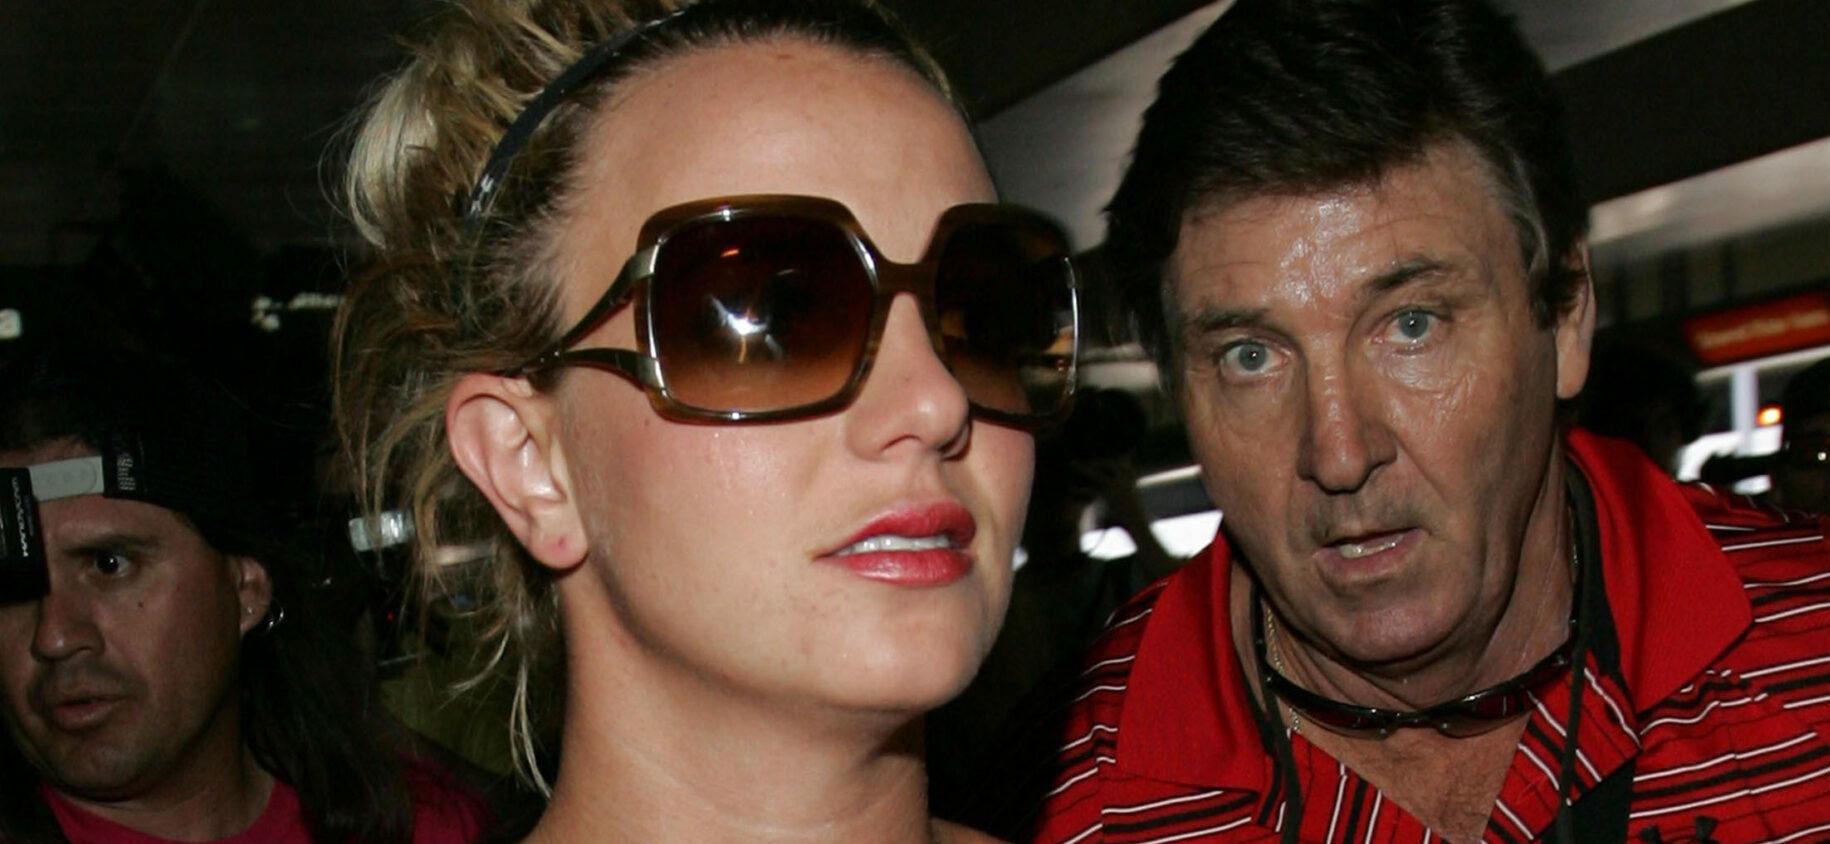 Britney Spears and Dad Jamie Spears’ Legal Battle Is Not Over Yet